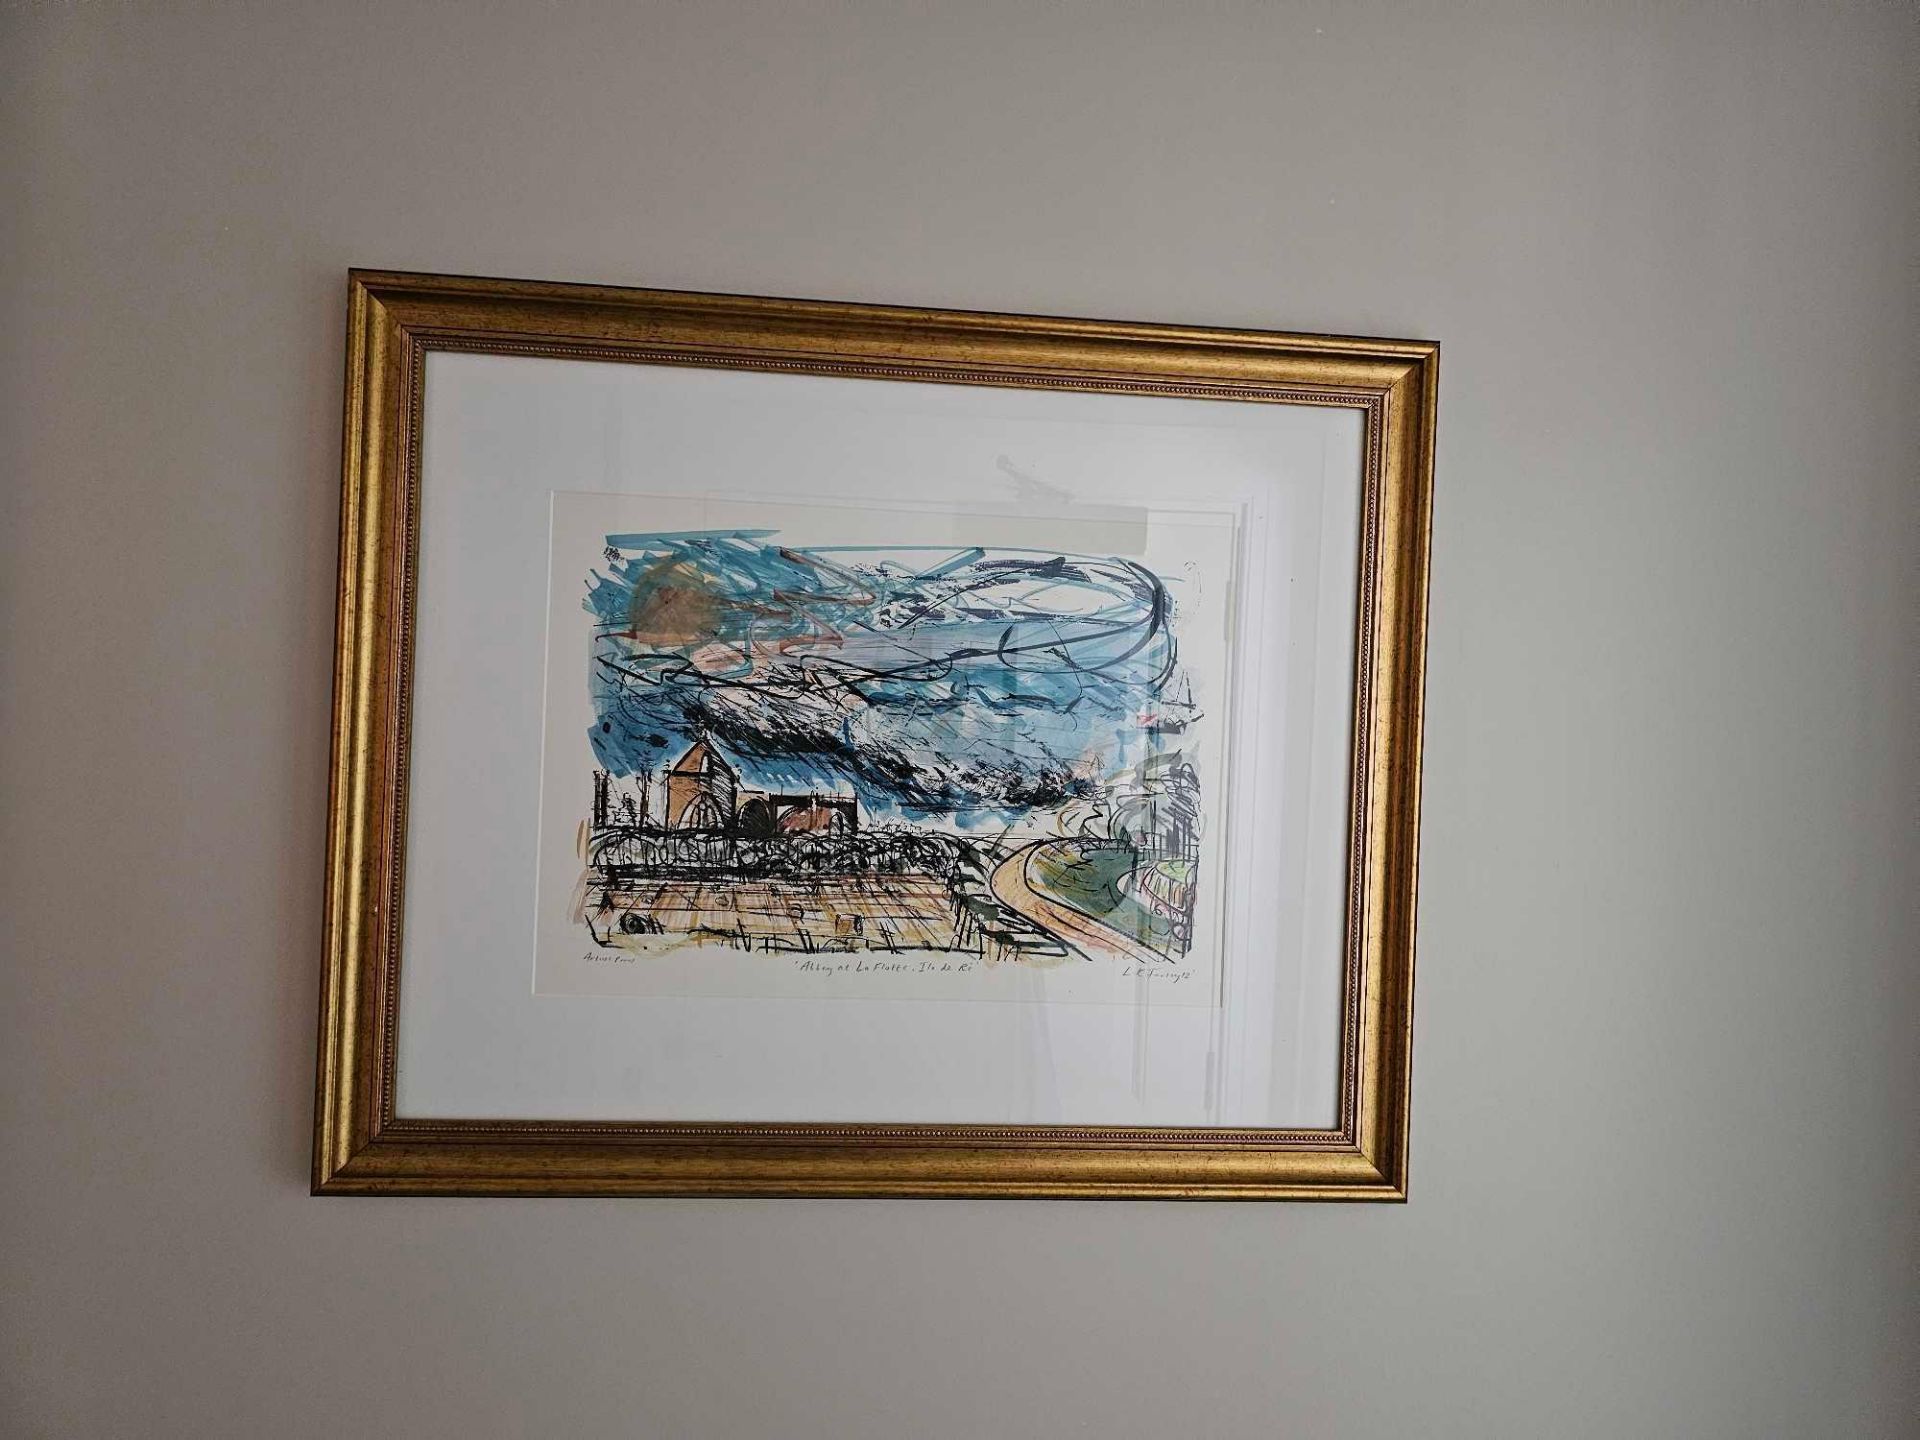 Framed Artwork Silkscreen Print on Paper Titled Abbey Ile de Ré by Lucy Farley - Image 2 of 4